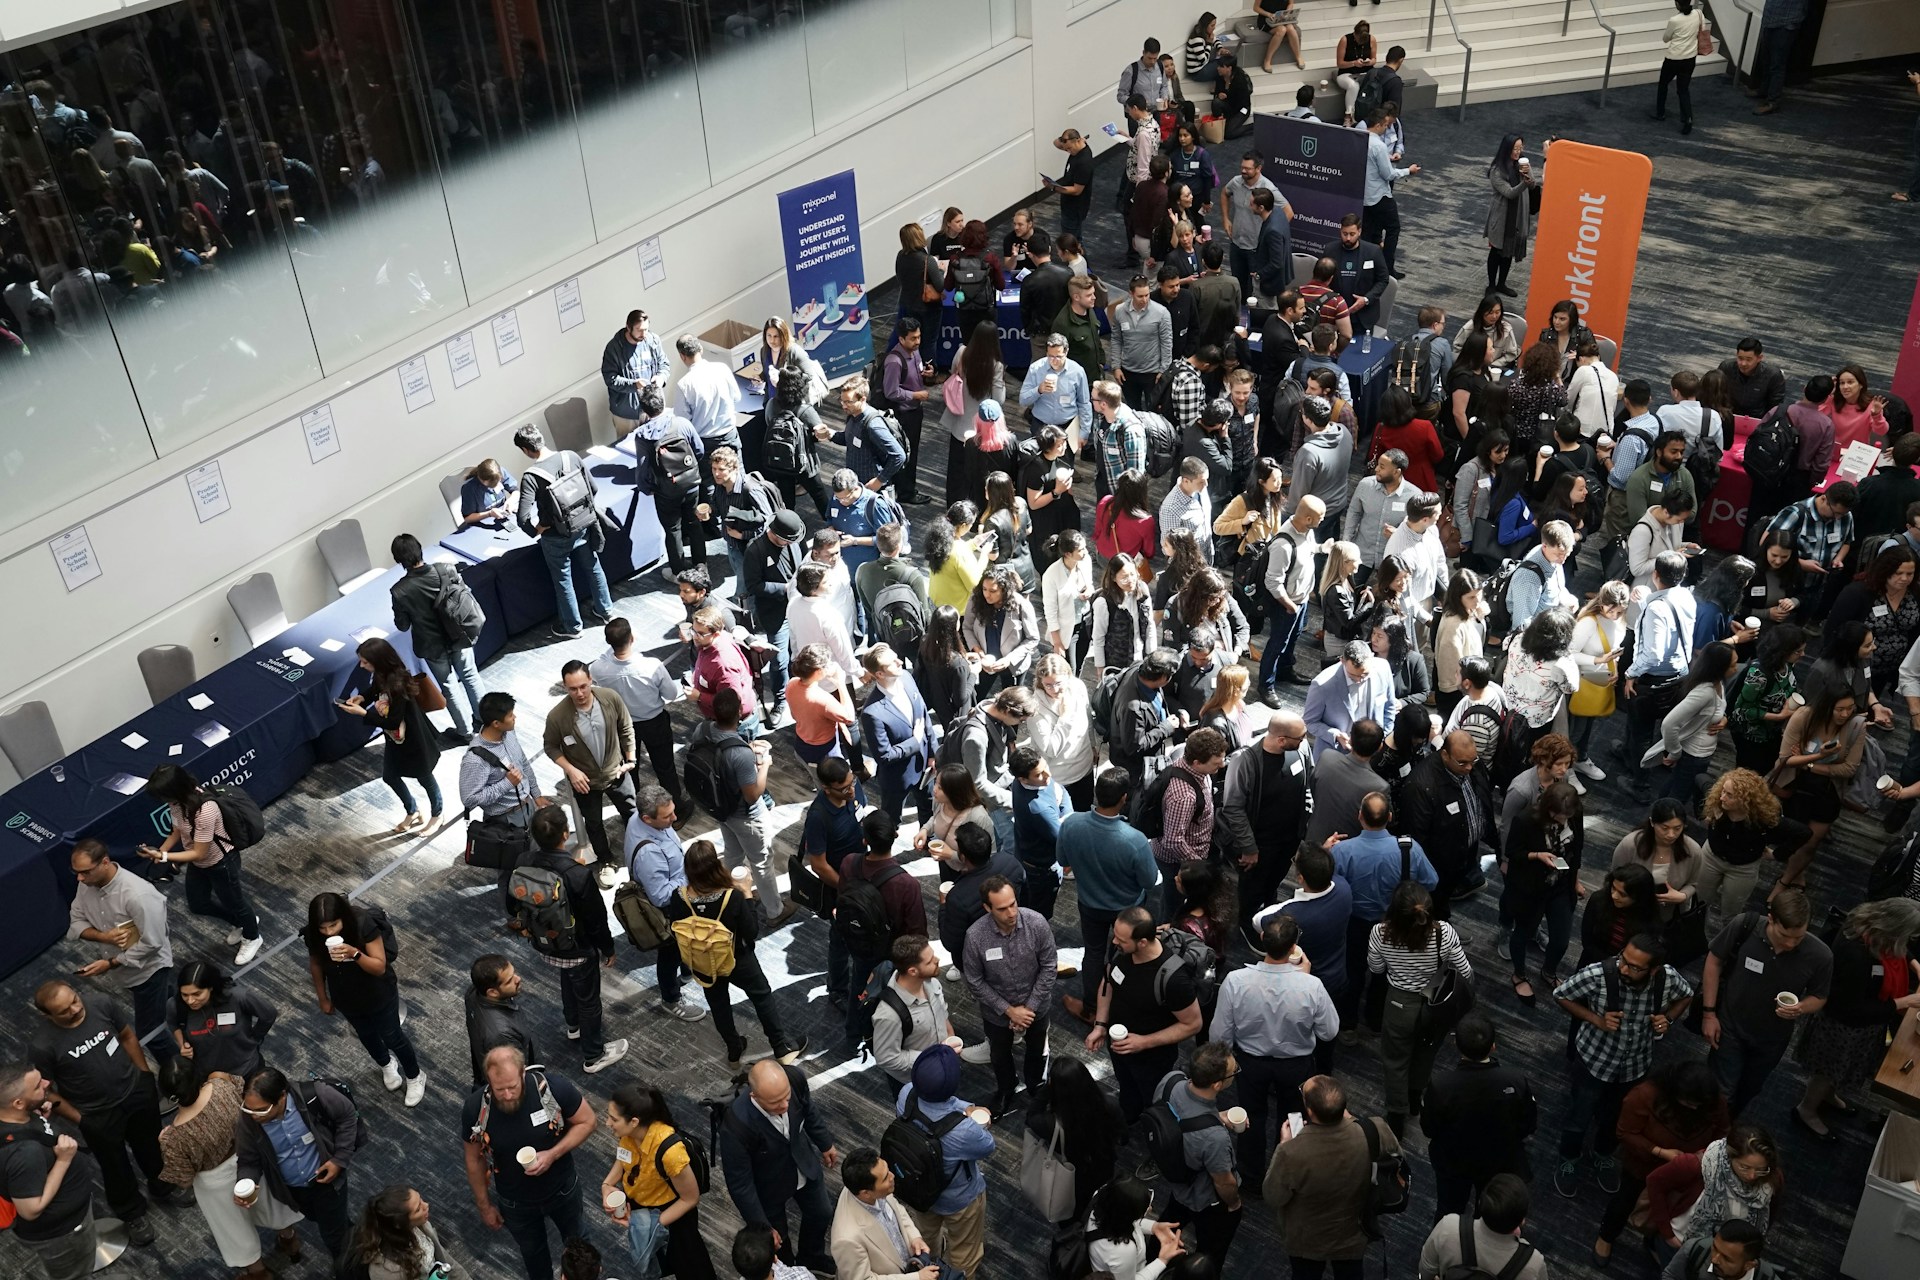 Image Title: DigiMarCon America Image Description: A huge crowd of participants in the lobby of a marketing conference Alt Text: Marketing professionals Source: https://unsplash.com/photos/crowd-of-people-in-building-lobby-nOvIa_x_tfo